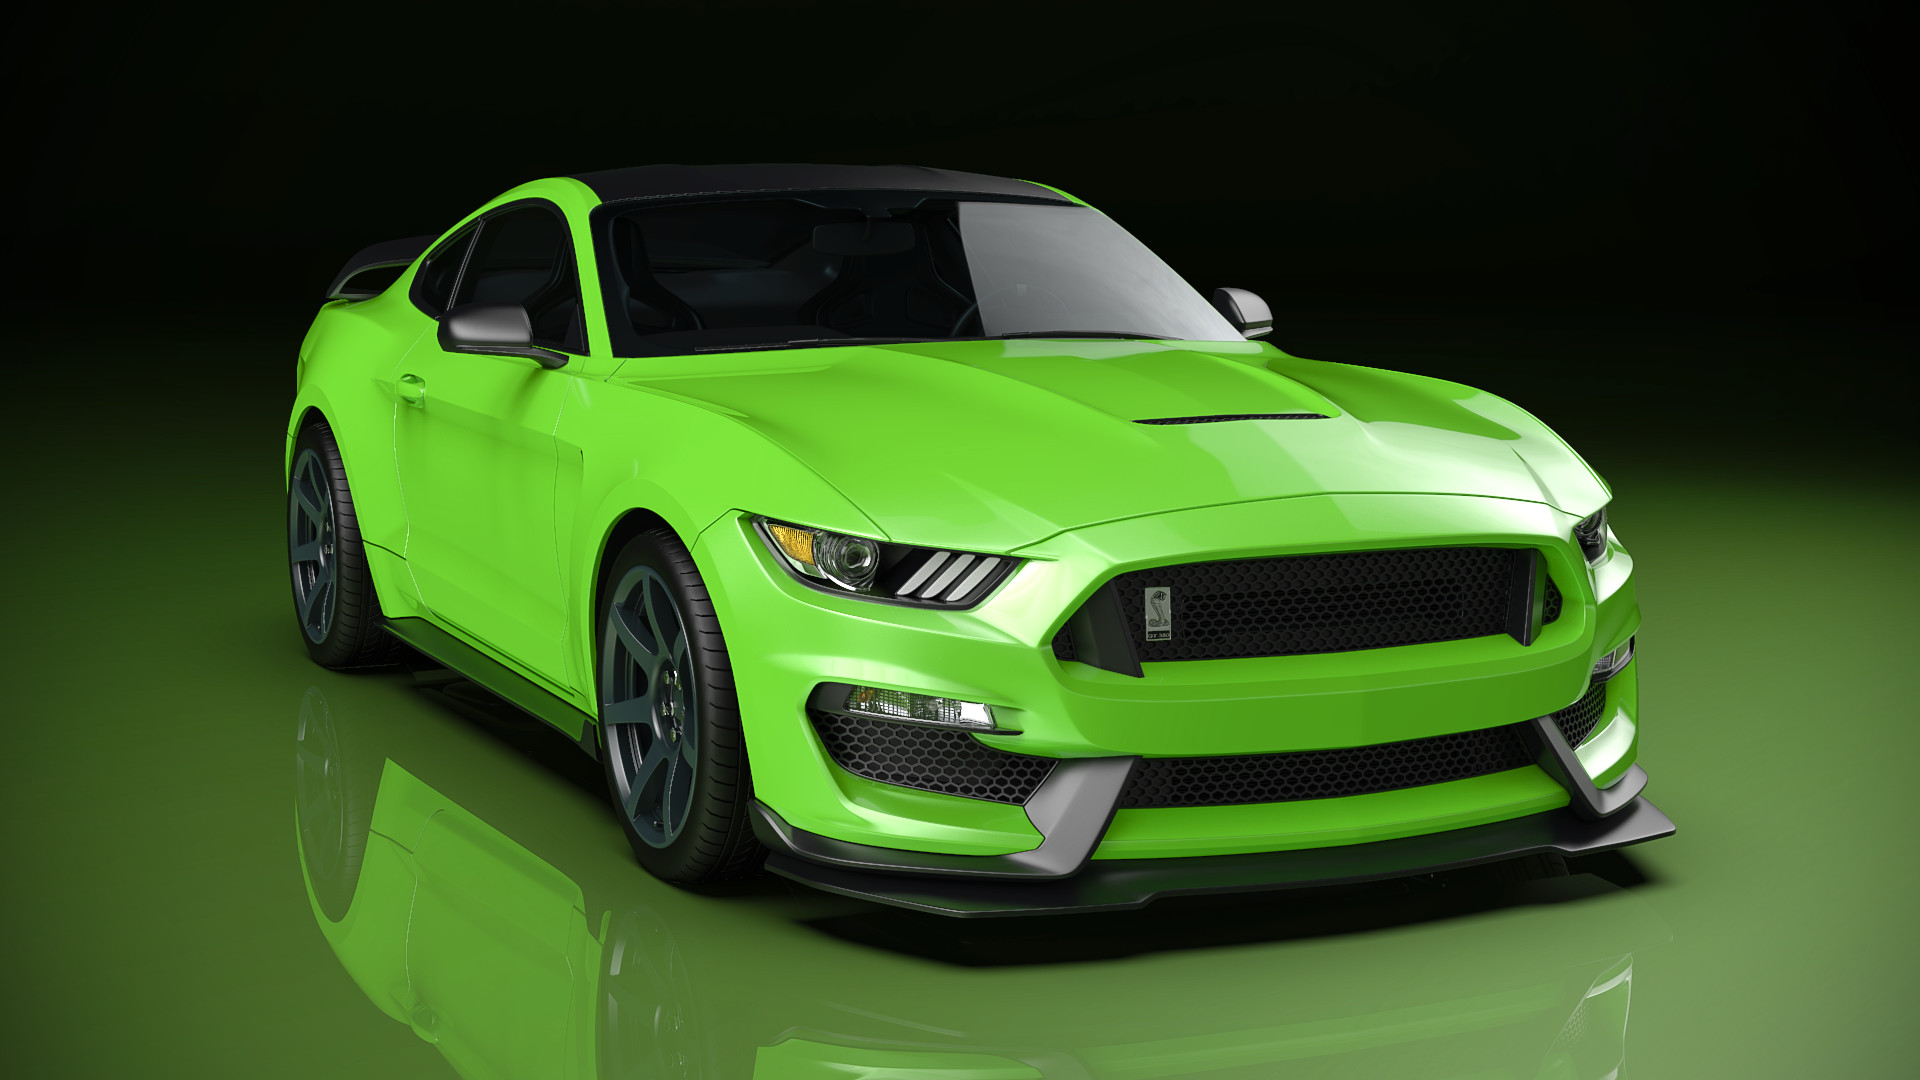 2020 Ford Mustang Shelby GT350R Wallpapers | SuperCars.net